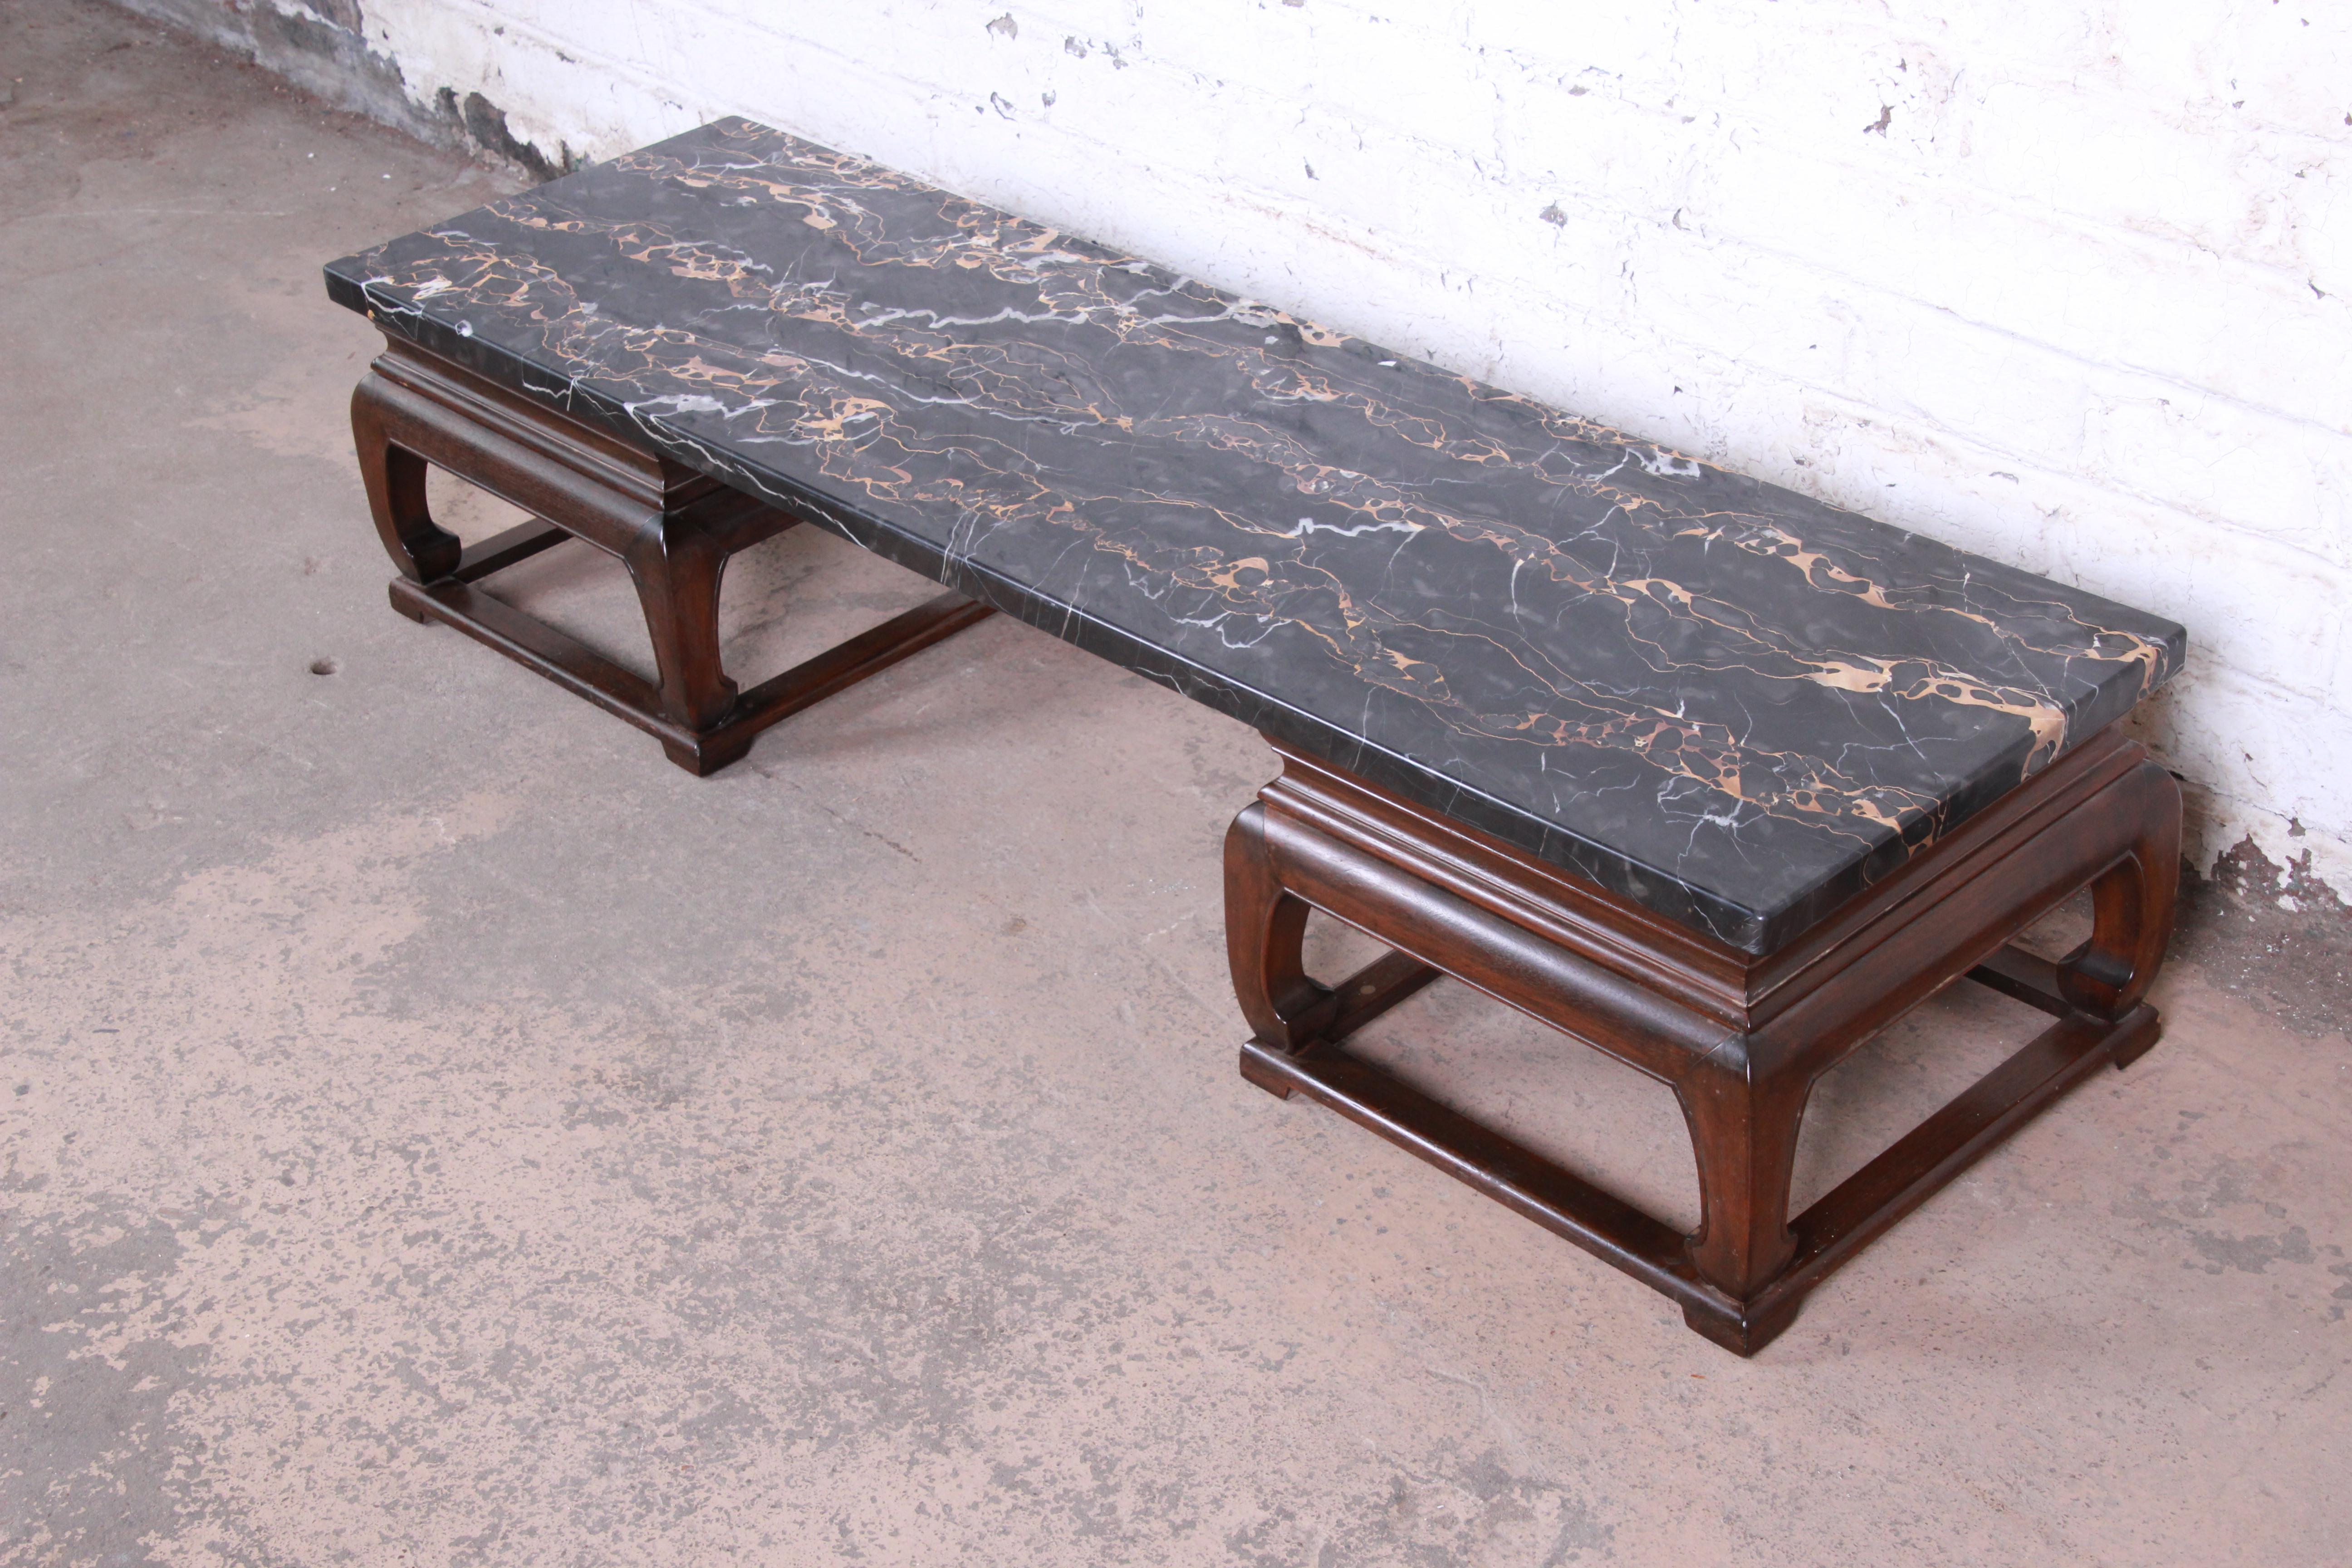 A rare and exceptional Mid-Century Modern chinoiserie marble top coffee table from the Far East collection by Michael Taylor for Baker Furniture. The table features a beautiful solid mahogany Asian-inspired double pedestal base and a truly stunning